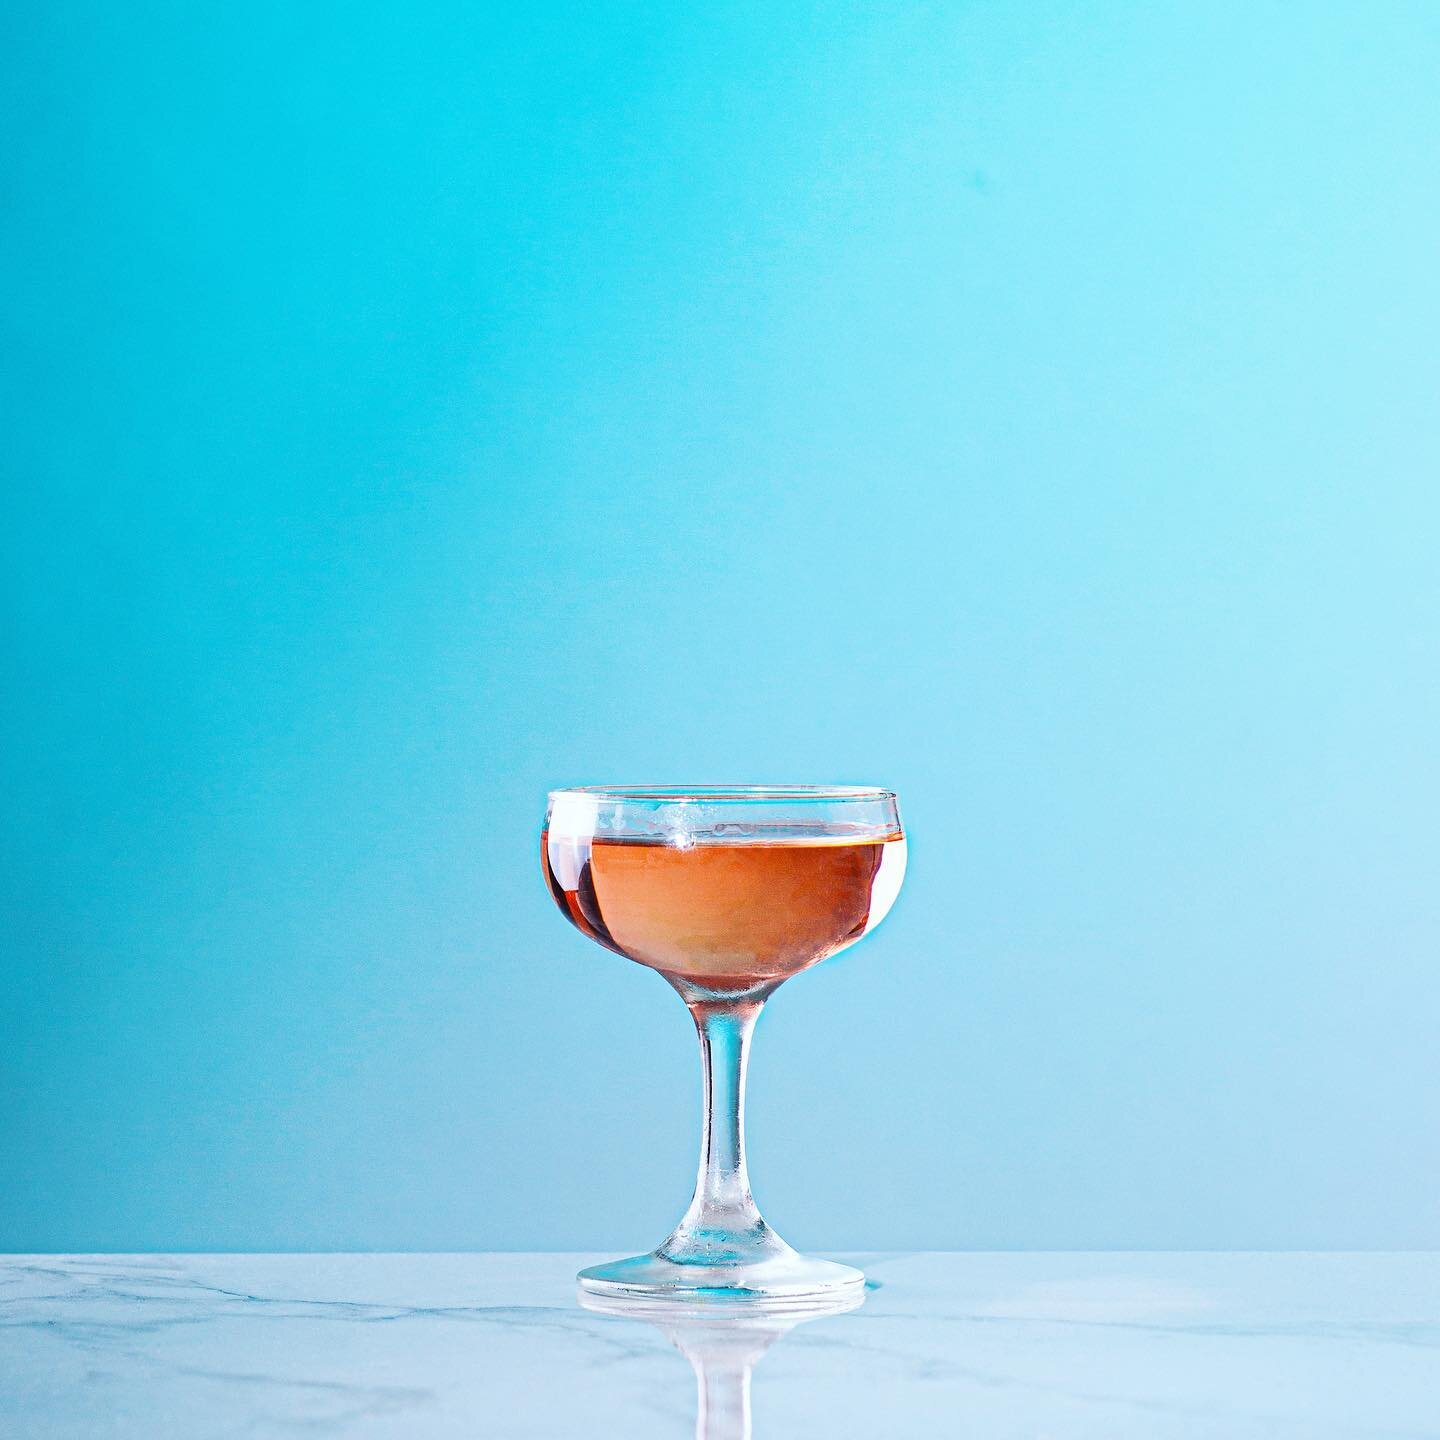 PLUM PRESIDENTE. Our twist on an El Presidente with @cabbysrum, our SCHOFIELD&rsquo;S Dry Vermouth, Umeshu &amp; Peychaud&rsquo;s Bitters. Bliss. 
-
Recipe by @joe_schofield 
📸 @todays_tipple 
-
.
.
.

#handmadealcohol
#negronilovers
#martinicocktai